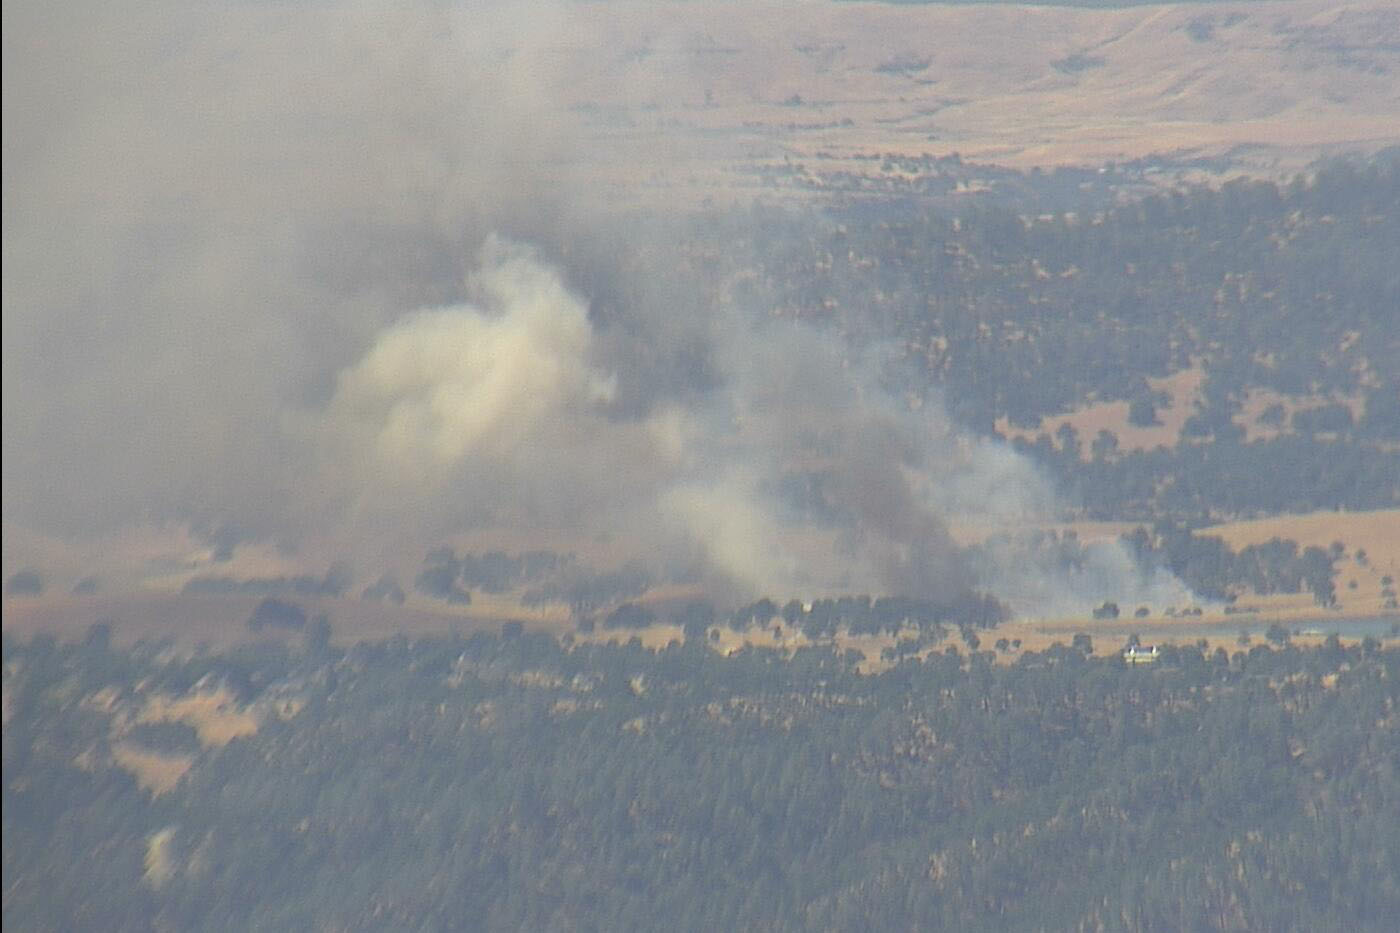 Vegetation Fire In The Copperopolis Area Of Calaveras County  2 